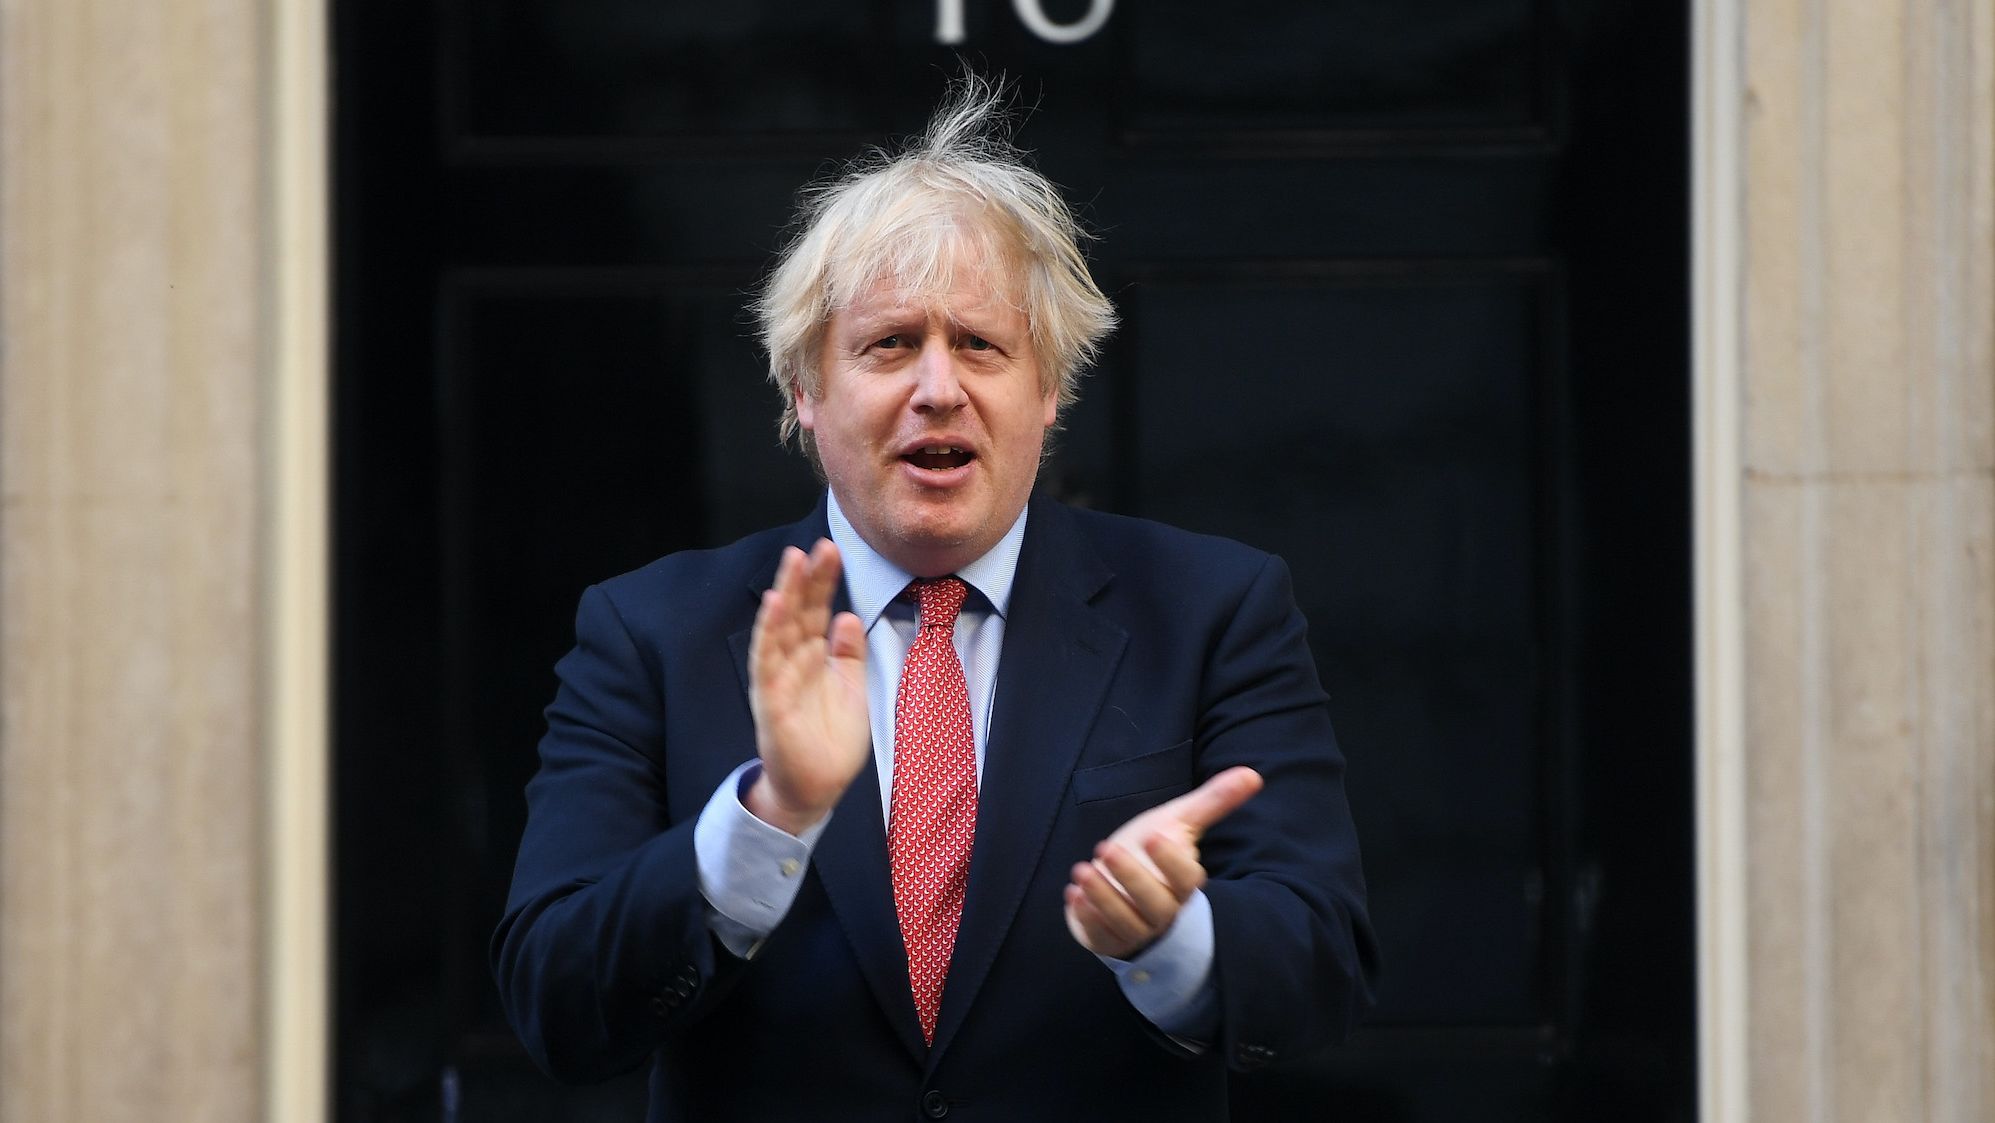 Boris Johnson has himself faced allegations of racism throughout his career.